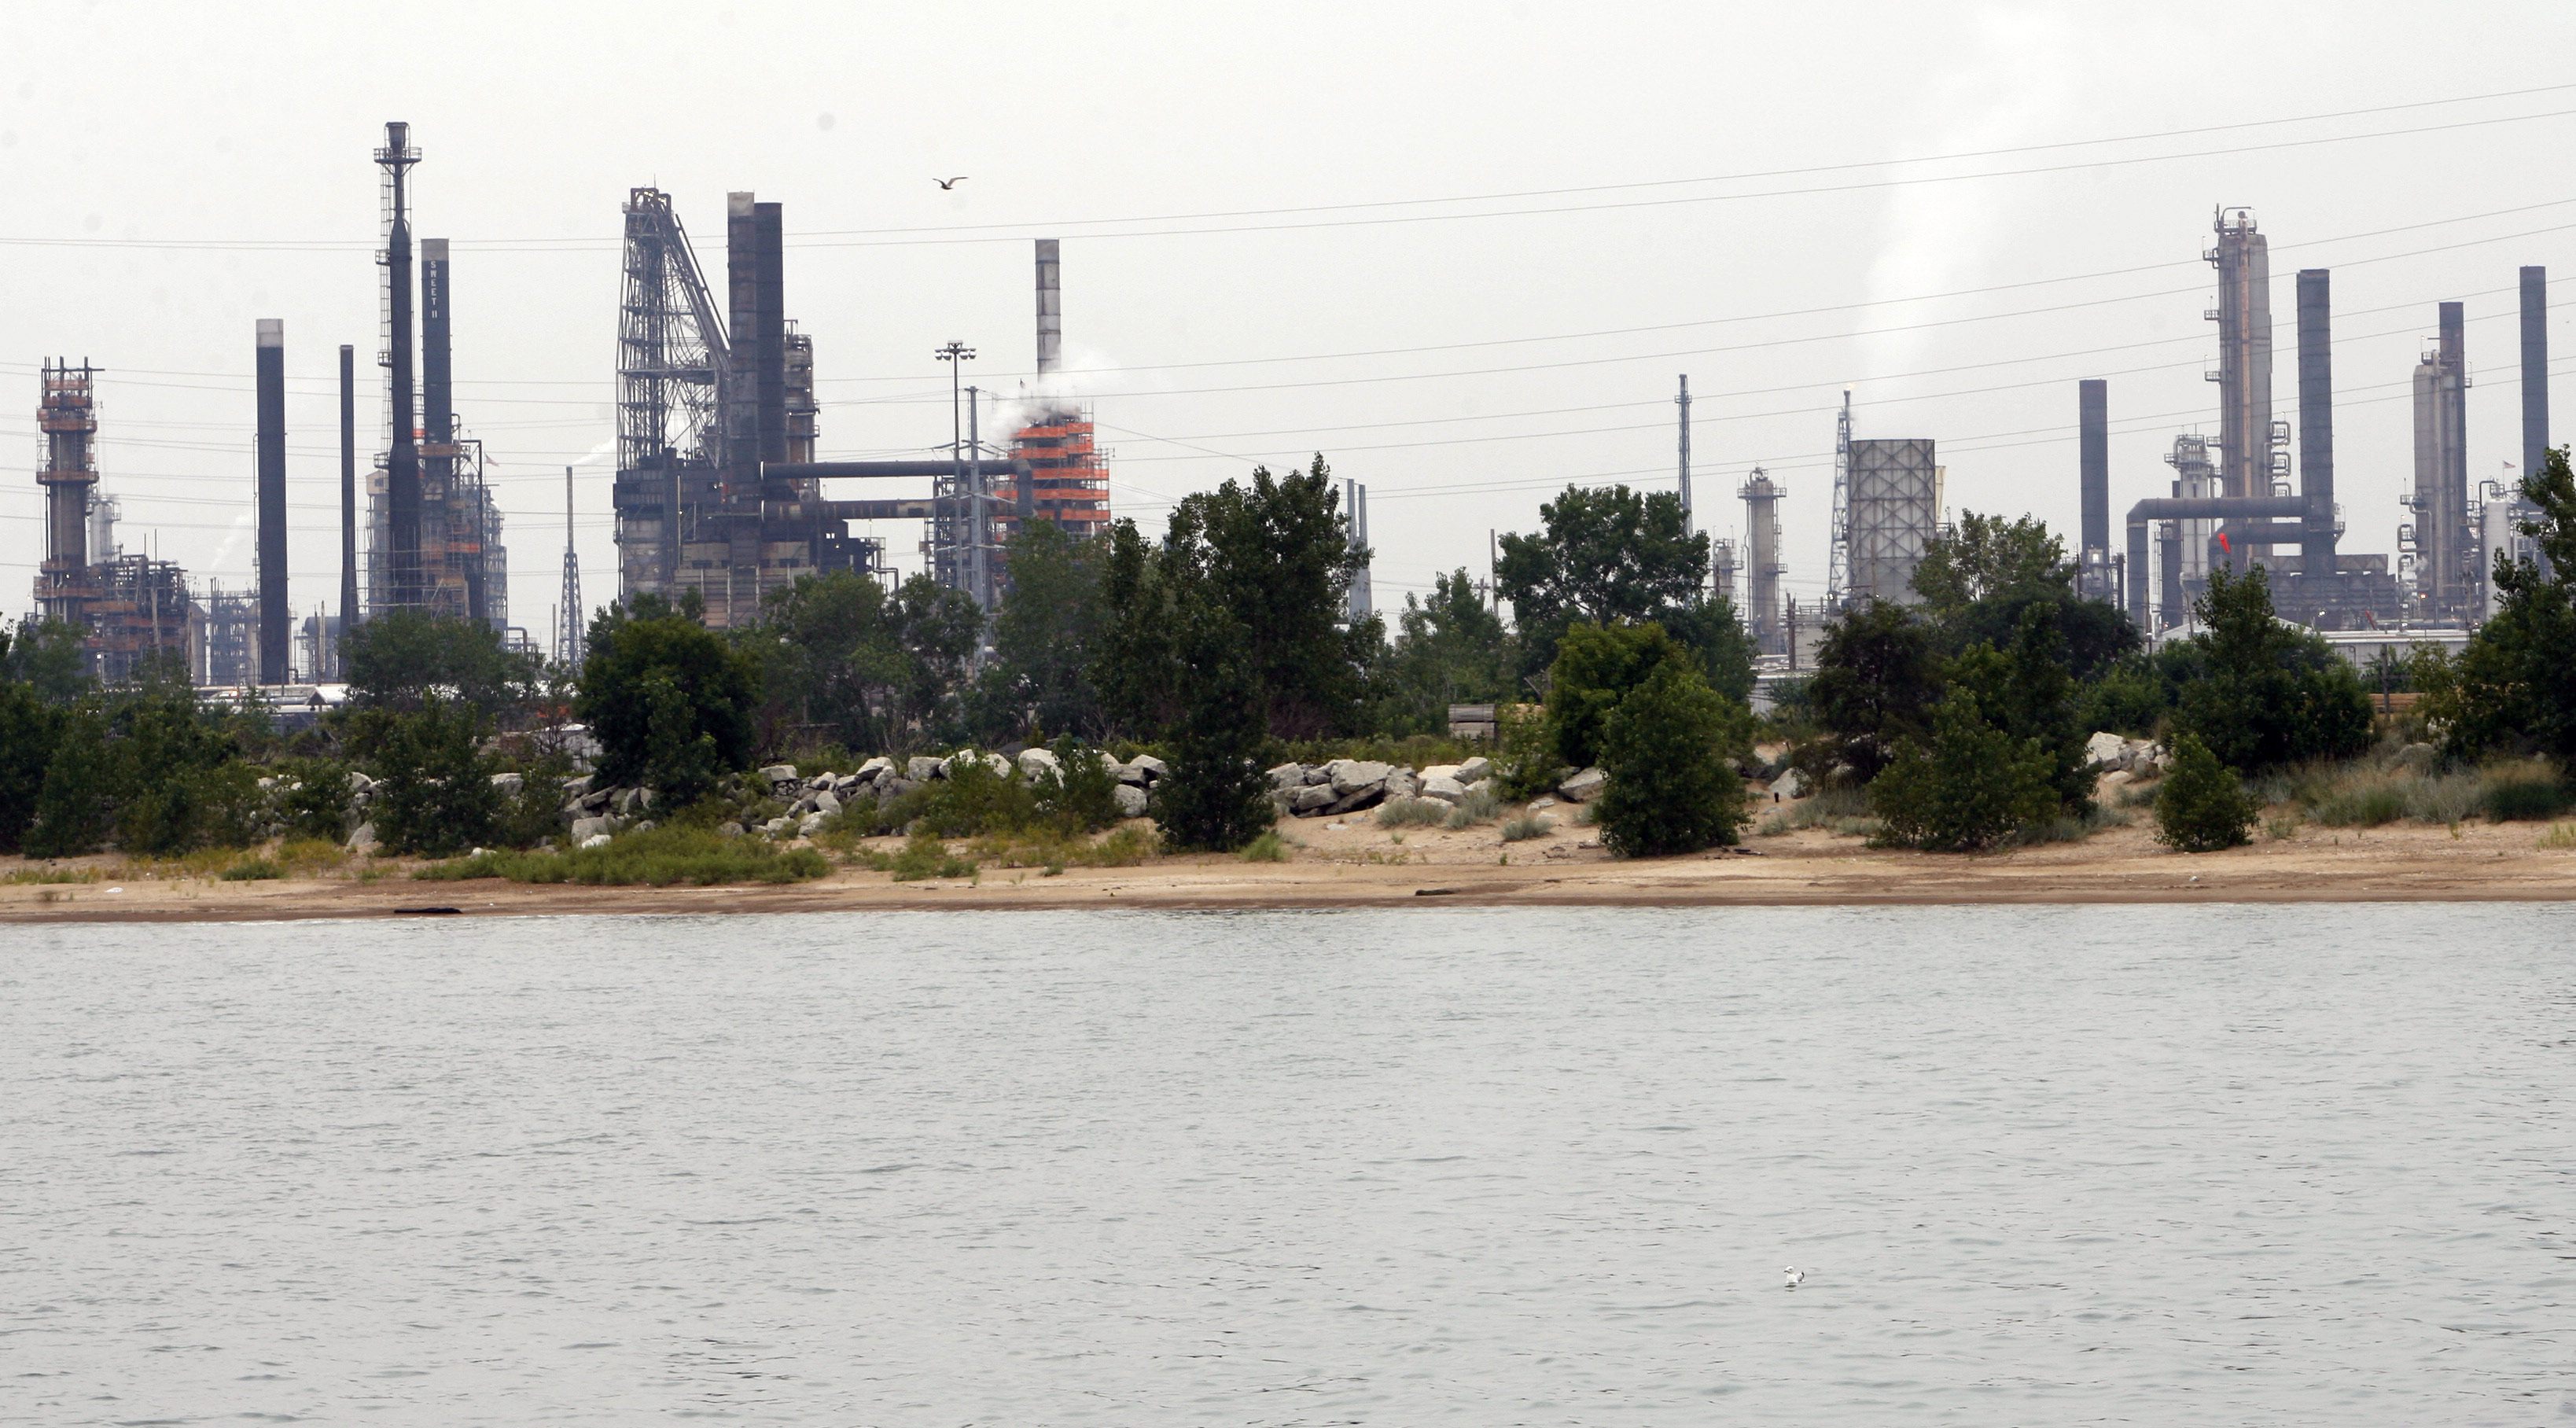 British Petrolium oil refinery refinery sits on the shore of Lake Michigan in Whiting Indiana